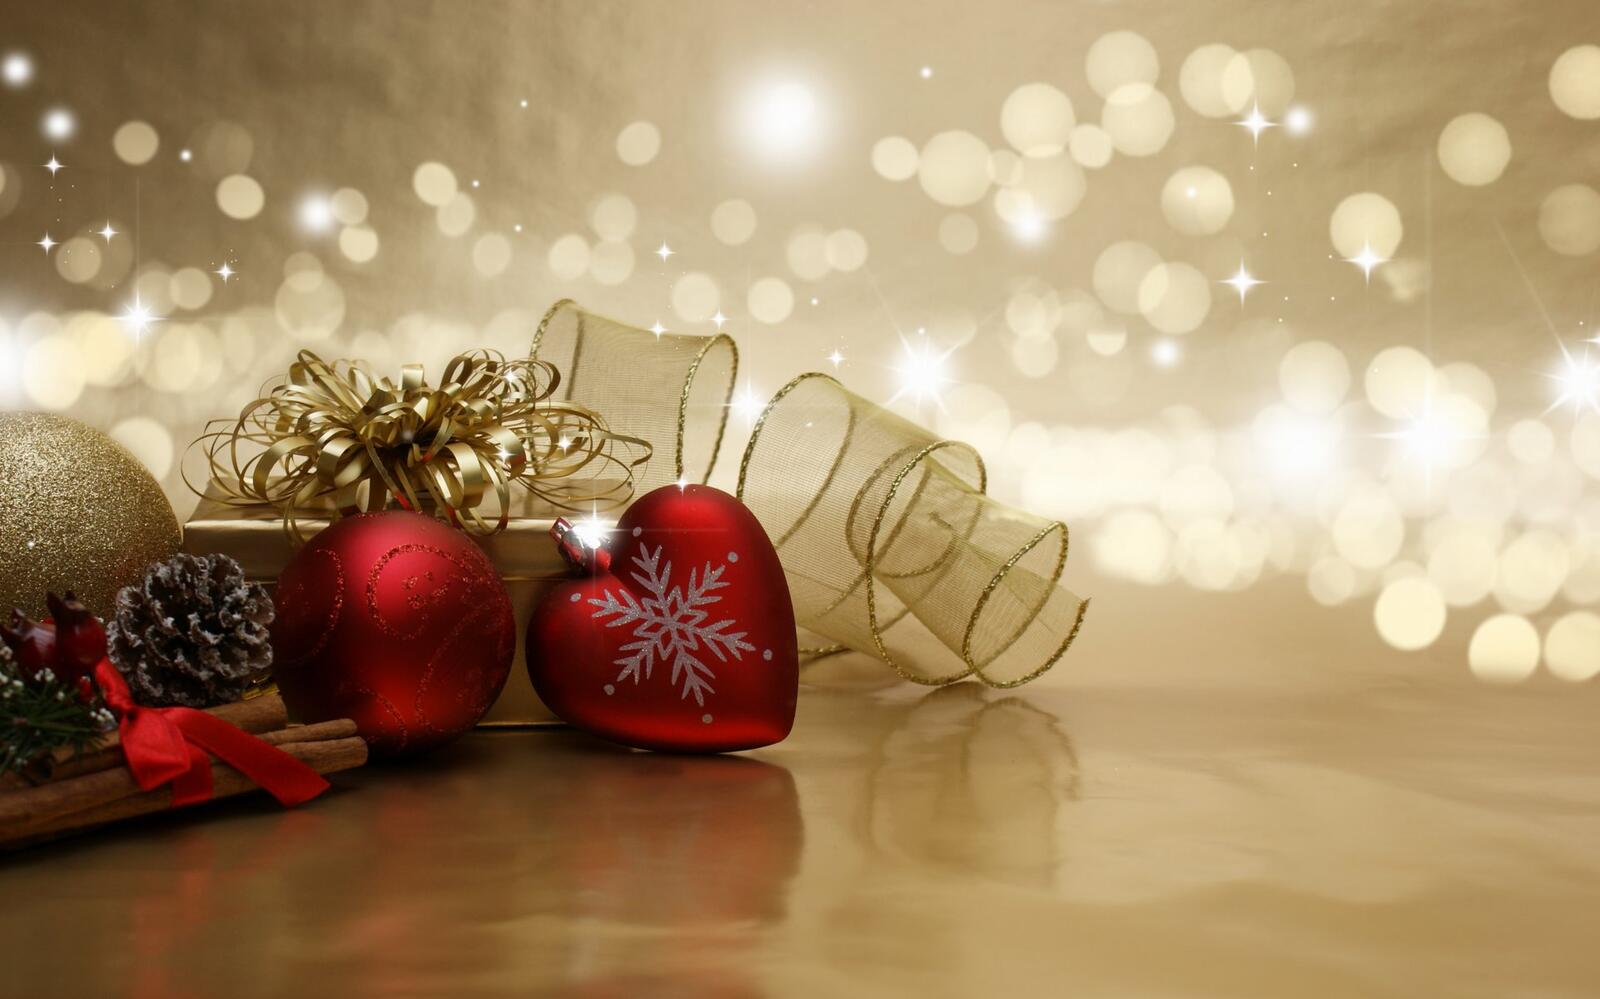 Wallpapers christmas ball new year decorations holiday on the desktop